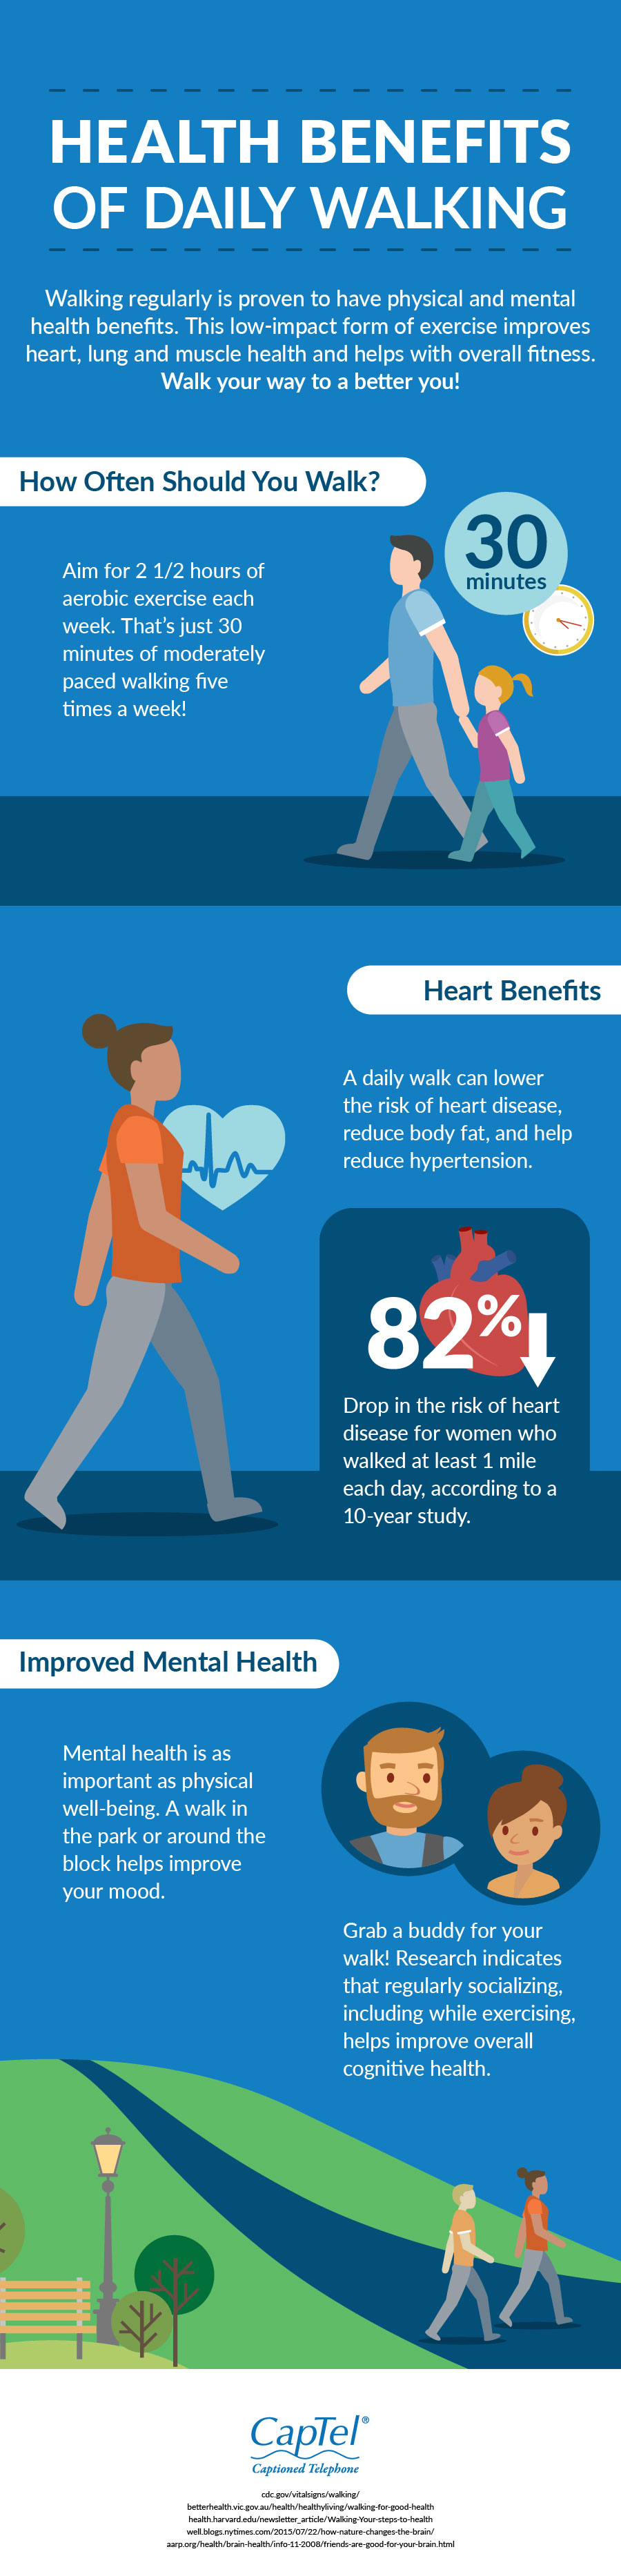 10 Surprising Benefits of Walking 1 Hour a Day